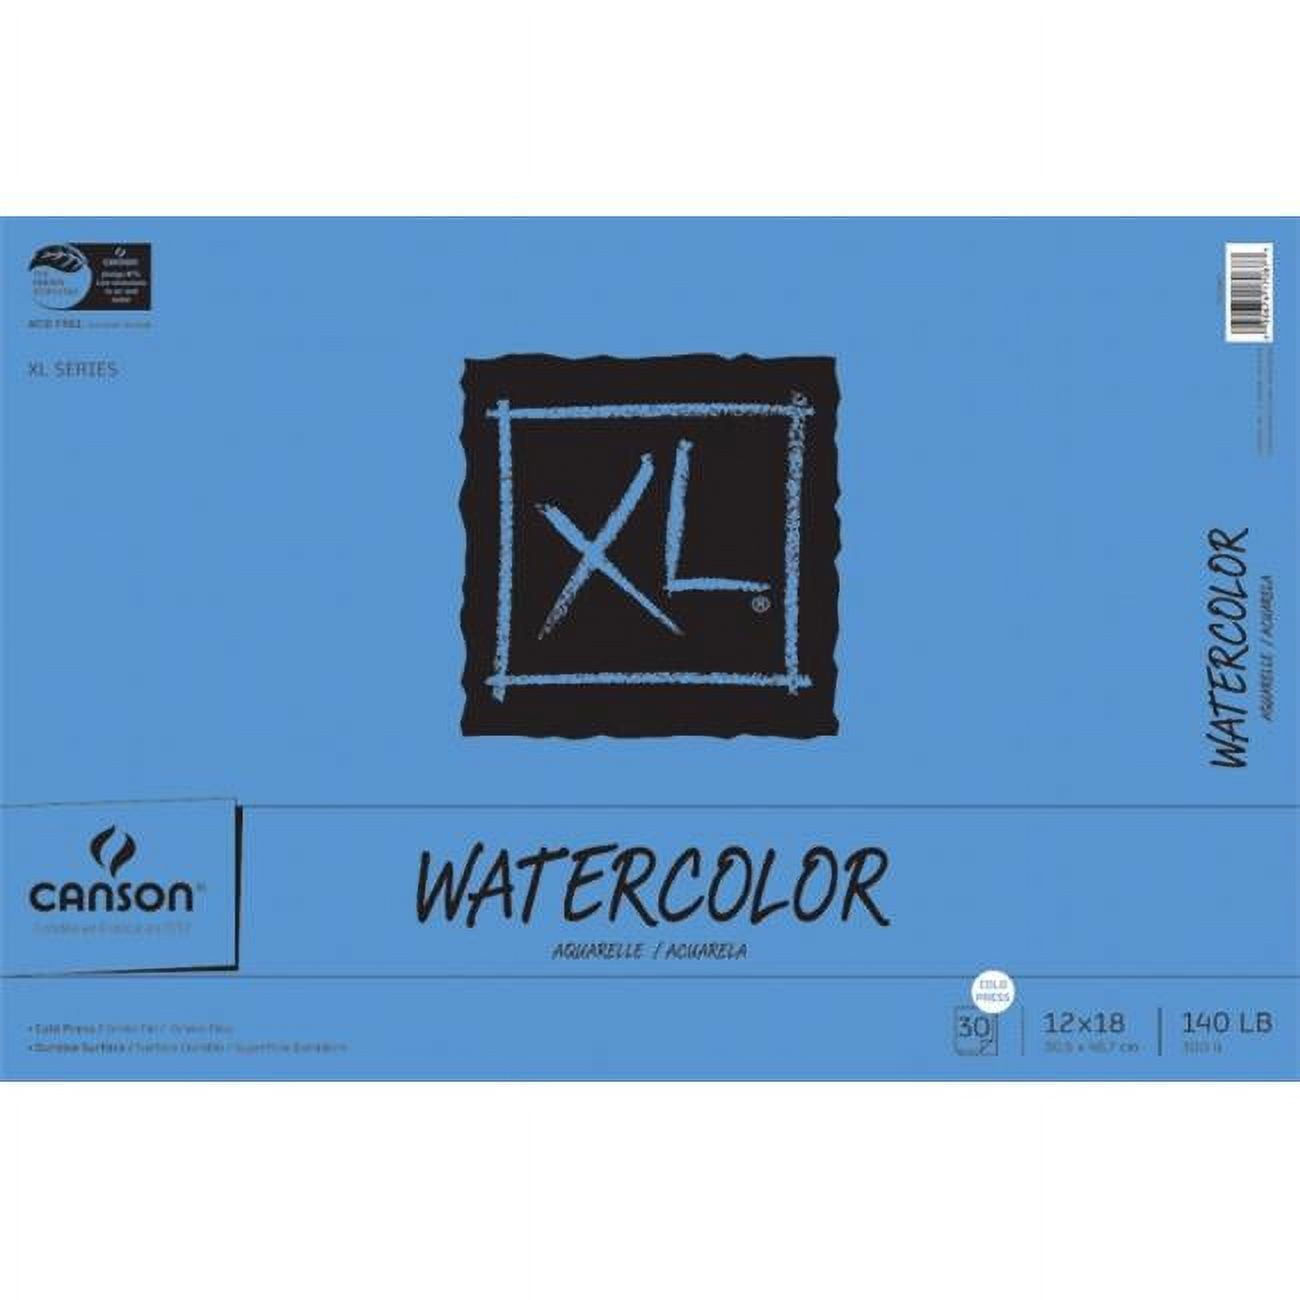 Canson XL Watercolor Sketch Pad, 9 X 12 Painting Paper Fold over